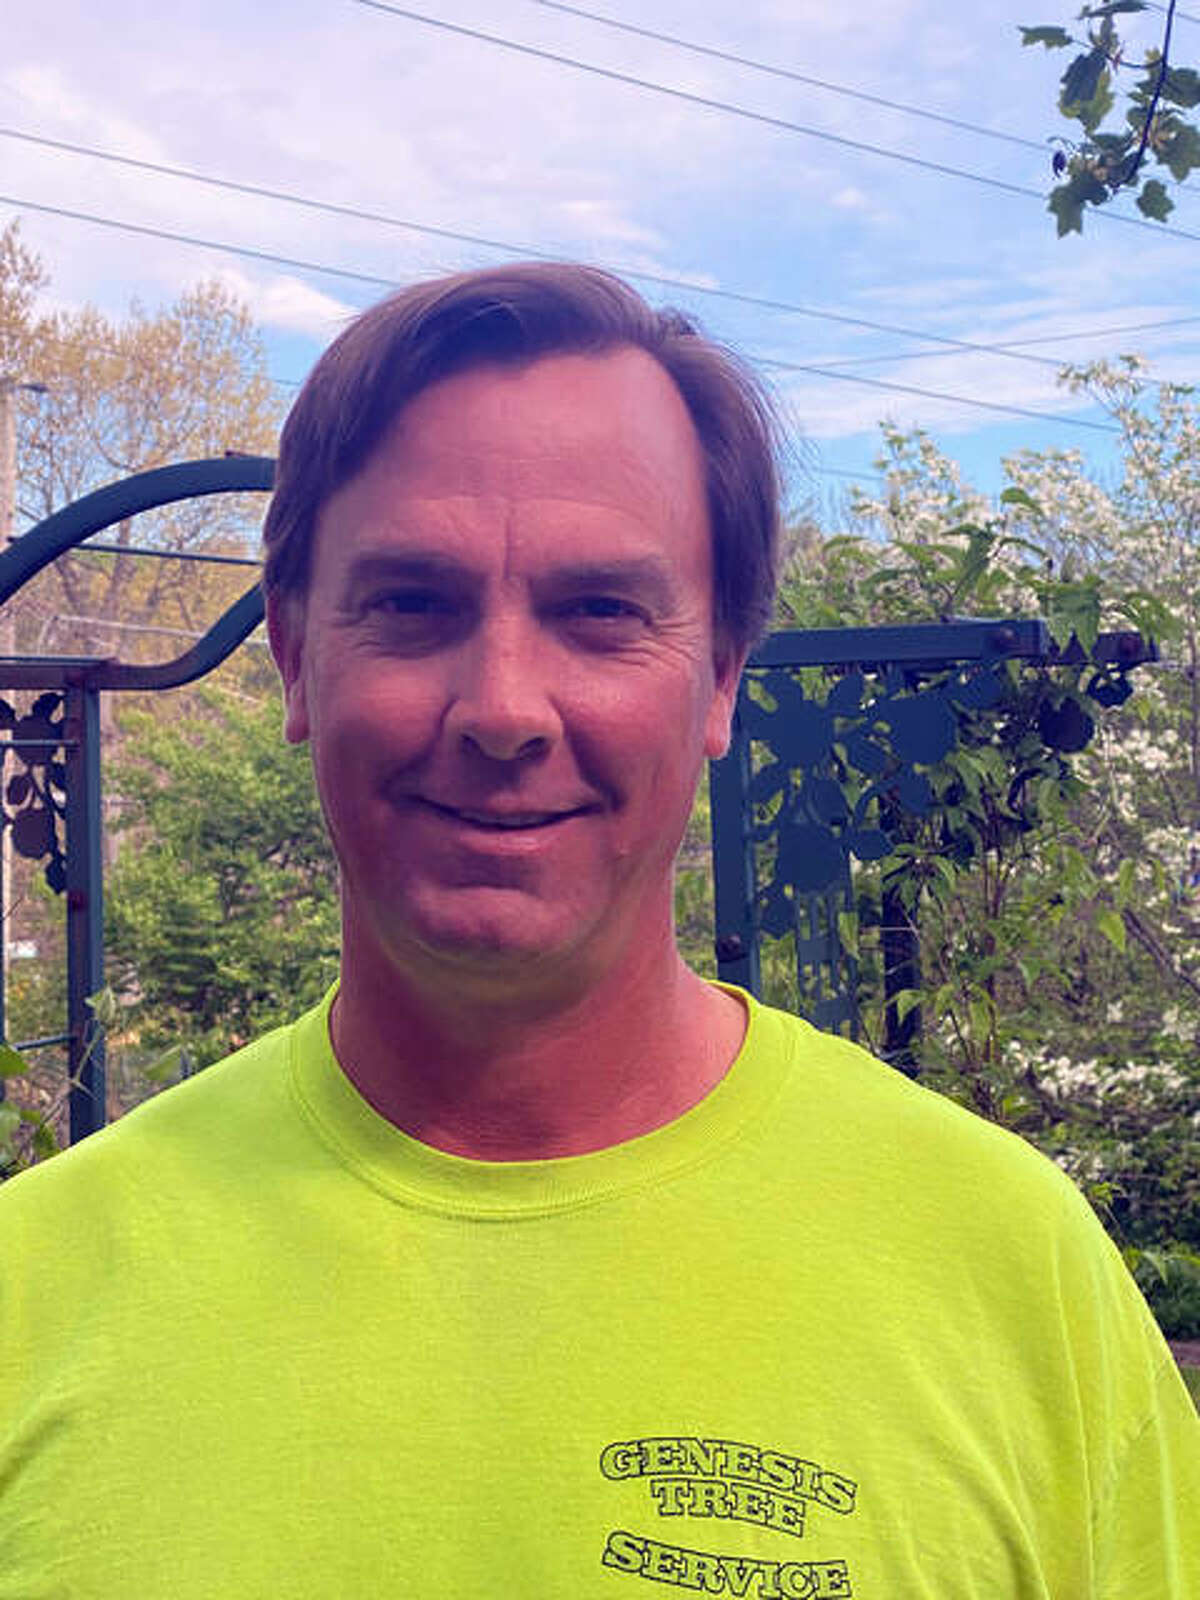 Daren McDonough, a 1992 Edwardsville graduate and a two-time Class AA state champion in the pole vault, is currently the owner of Genesis Tree Service in Ballwin, Missouri.